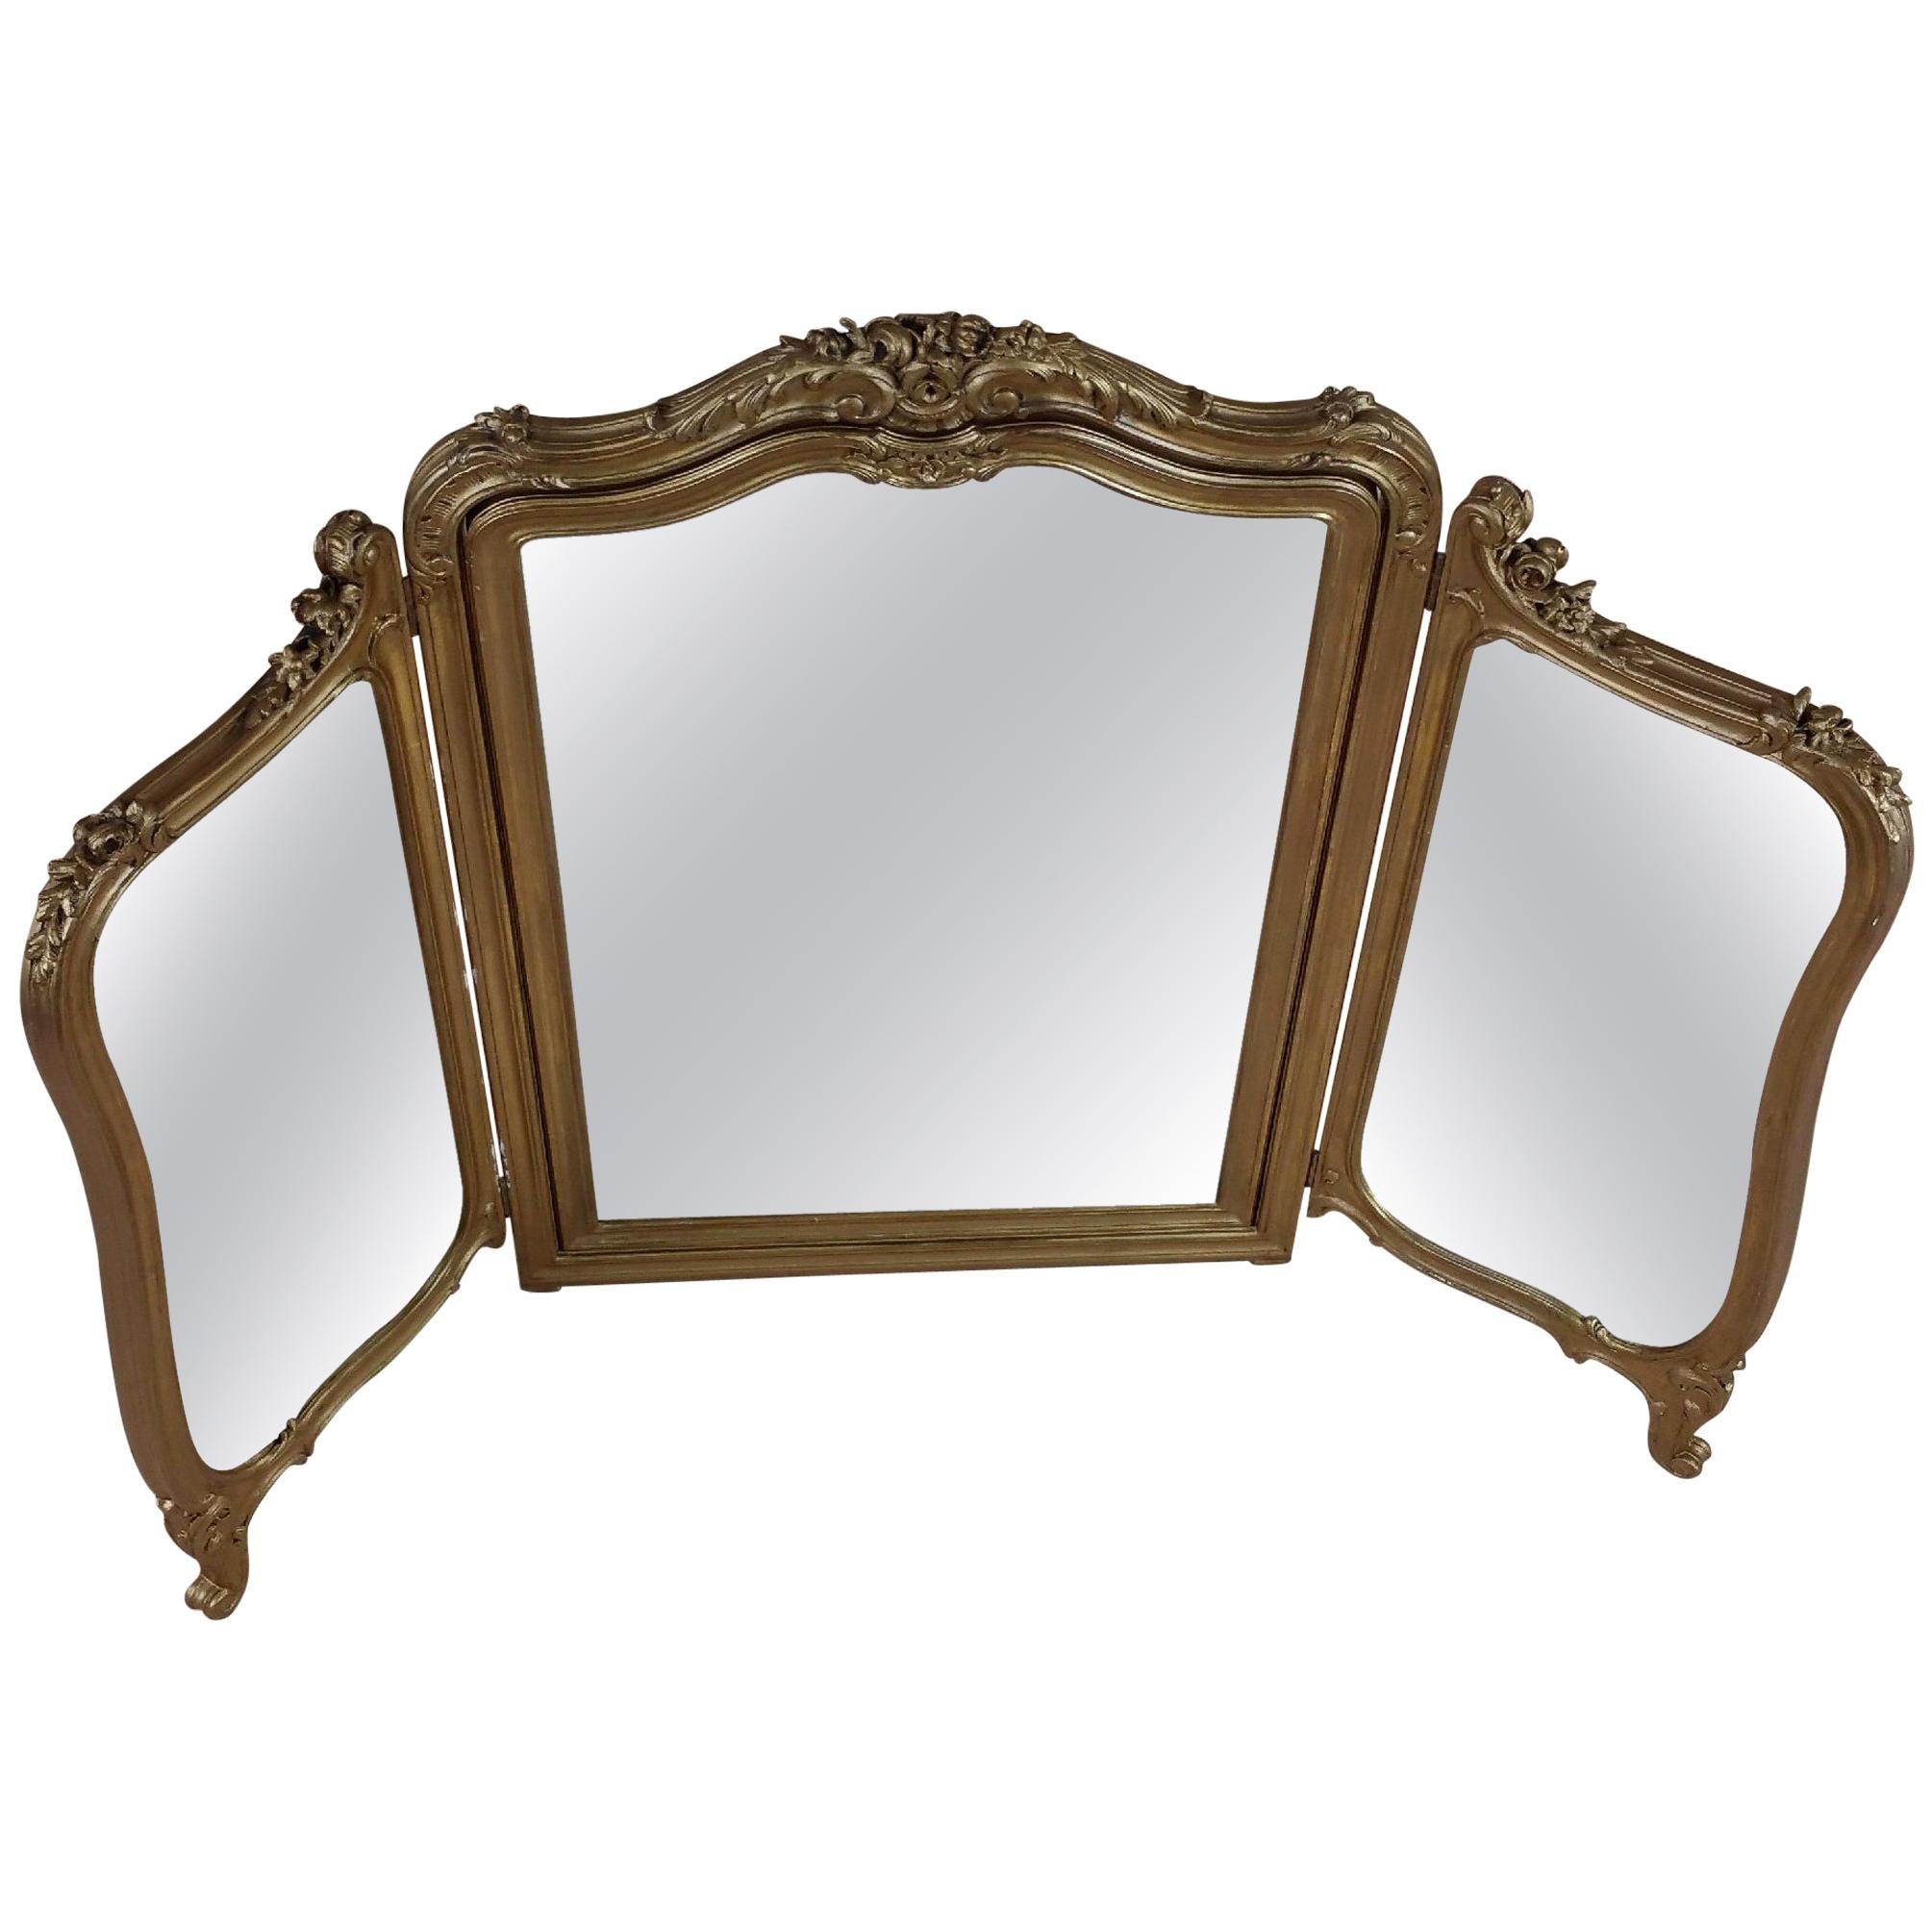 19th Century English Carved Giltwood Folding Triptych Mirror For Sale